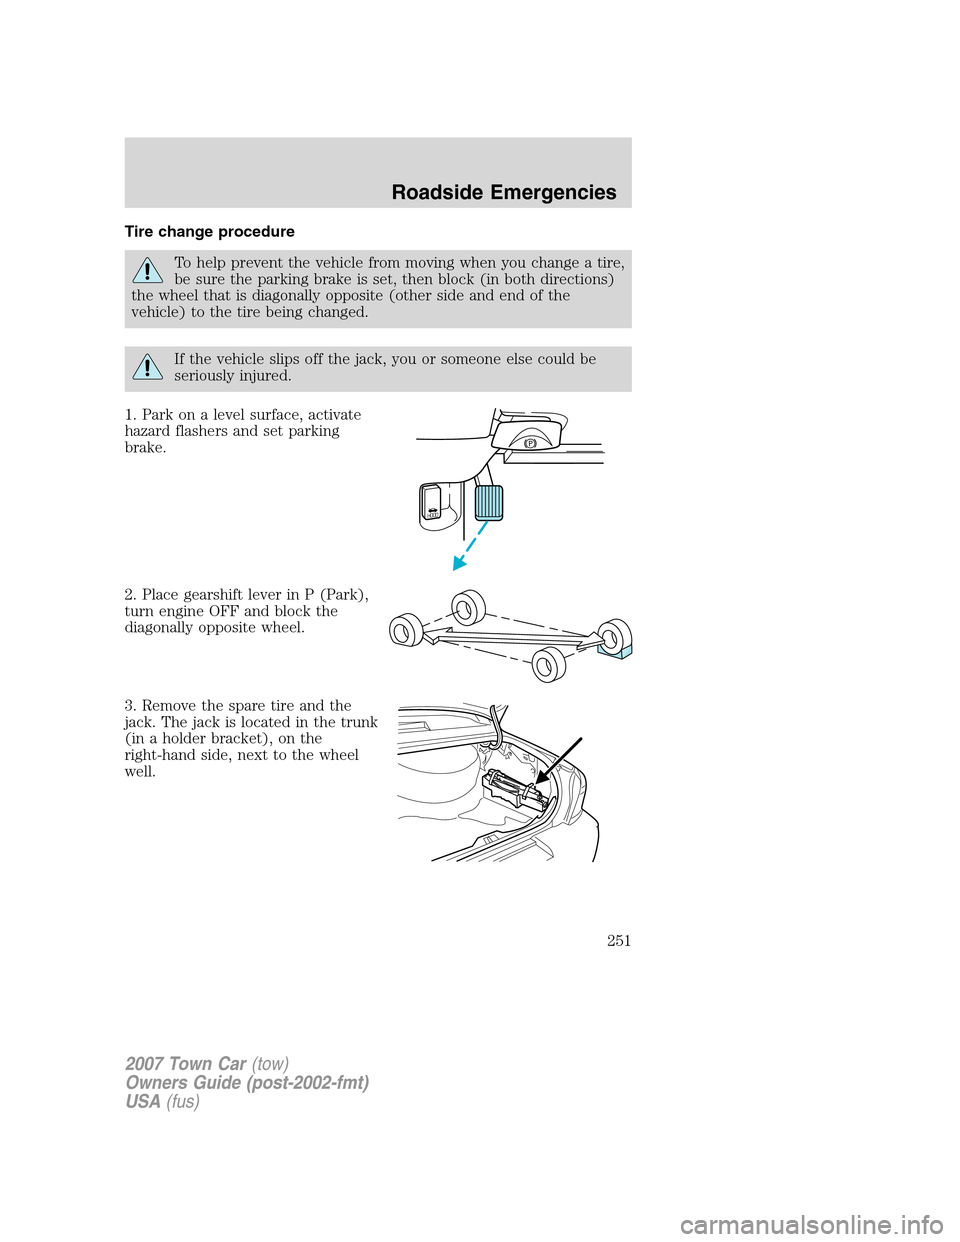 LINCOLN TOWN CAR 2007  Owners Manual Tire change procedure
To help prevent the vehicle from moving when you change a tire,
be sure the parking brake is set, then block (in both directions)
the wheel that is diagonally opposite (other sid